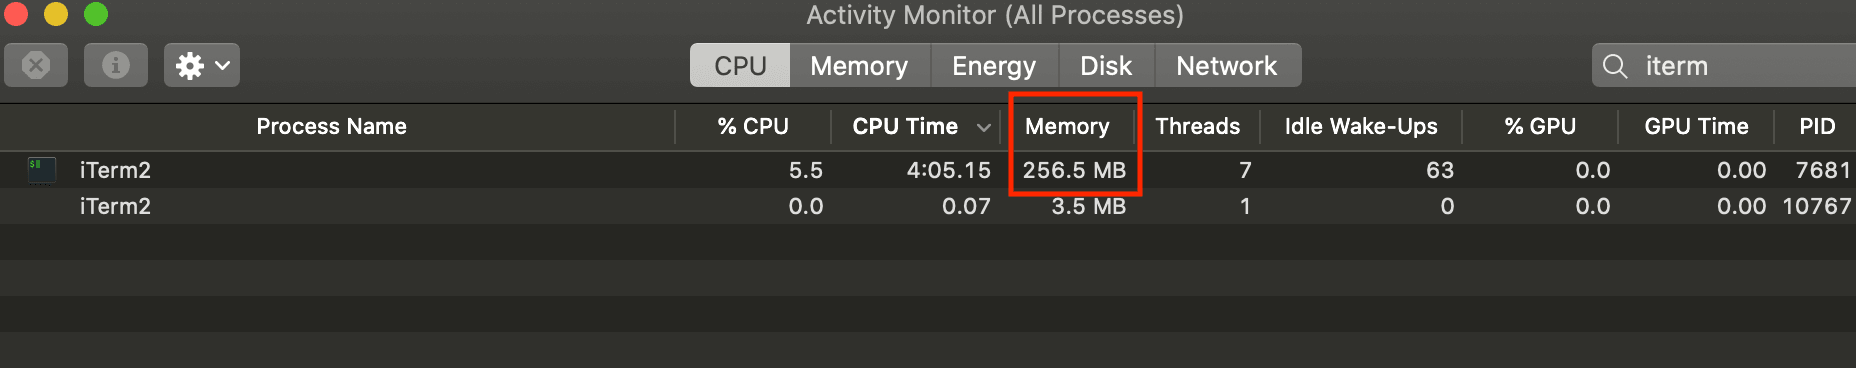 Activity monitor screenshot with memory of 256.5 MB highlighted in a red box